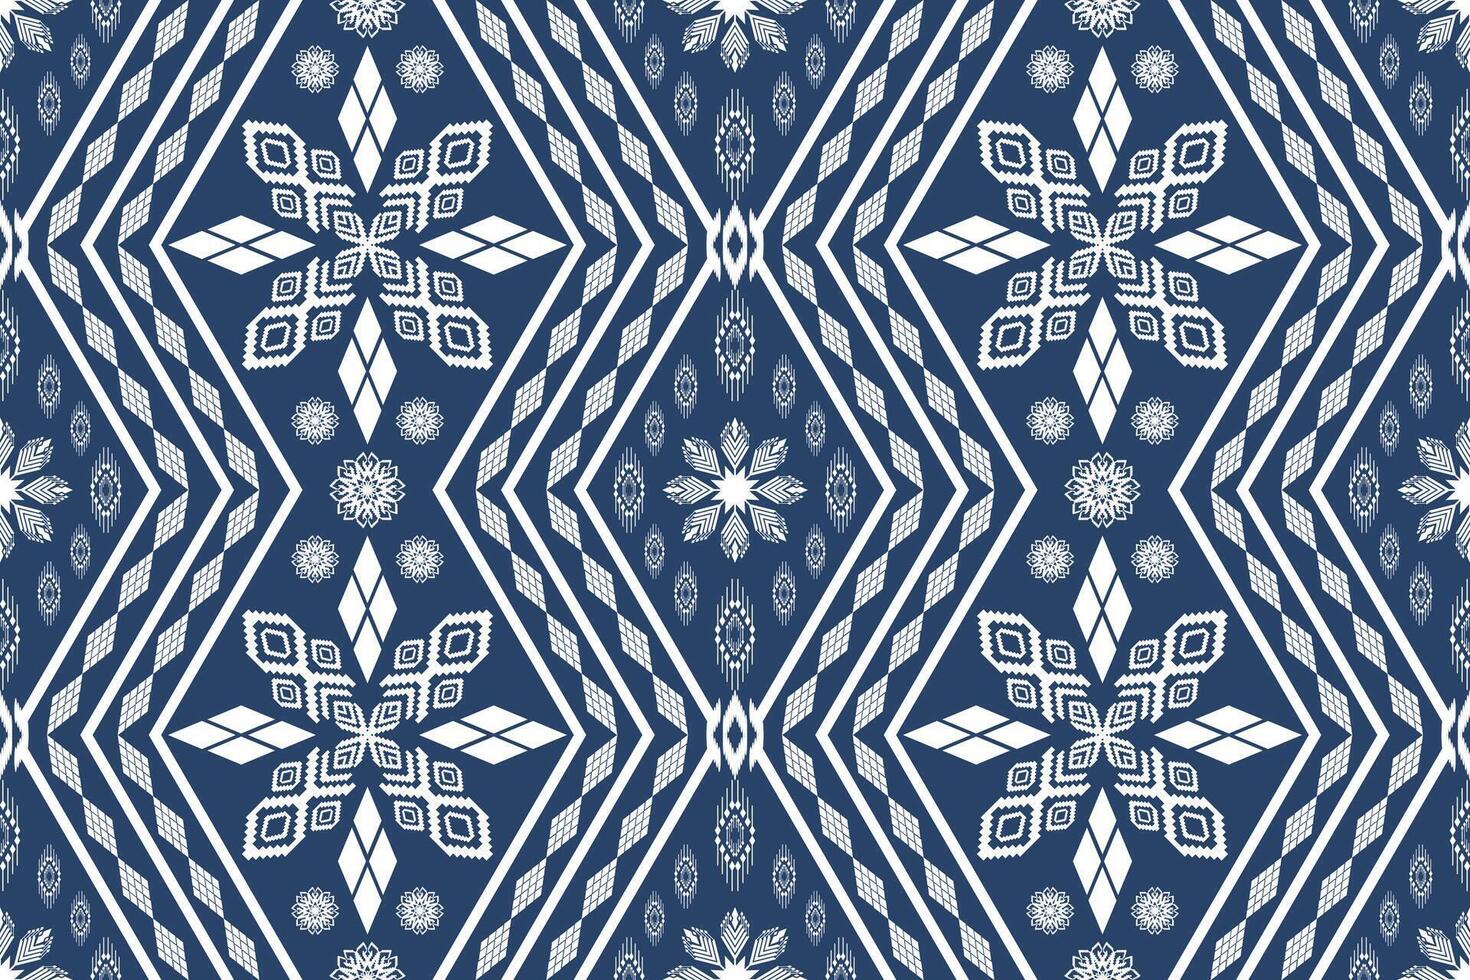 Ethnic Figure aztec embroidery style.Geometric ikat oriental traditional art pattern.Design for ethnic background,wallpaper,fashion,clothing,wrapping,fabric,element,sarong,graphic,vector illustration. vector